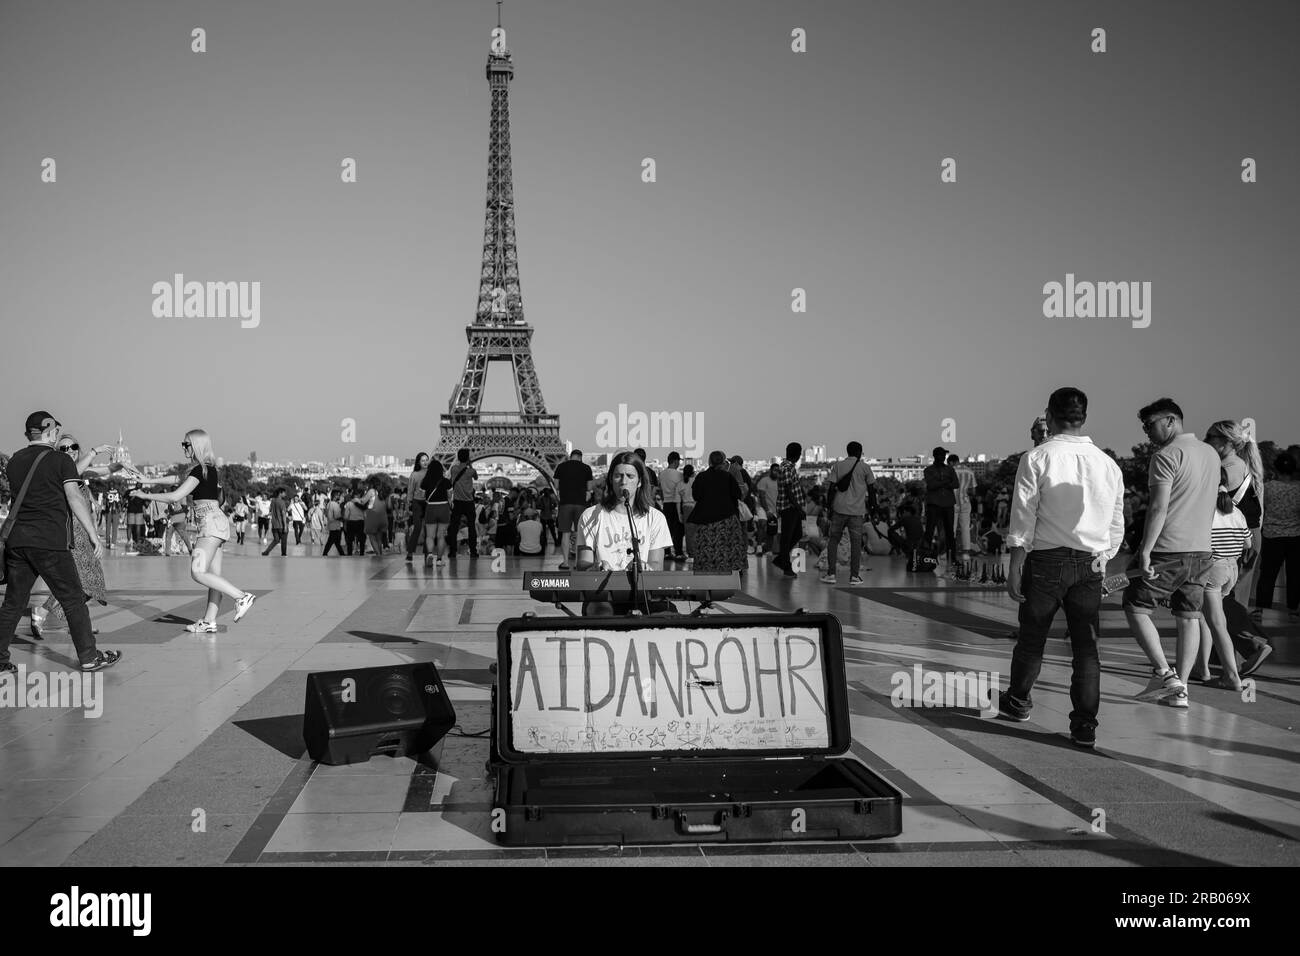 Paris, France - June 25, 2023 : View of a street musician playing music in front of the Eiffel Tower in Paris France in black and white Stock Photo